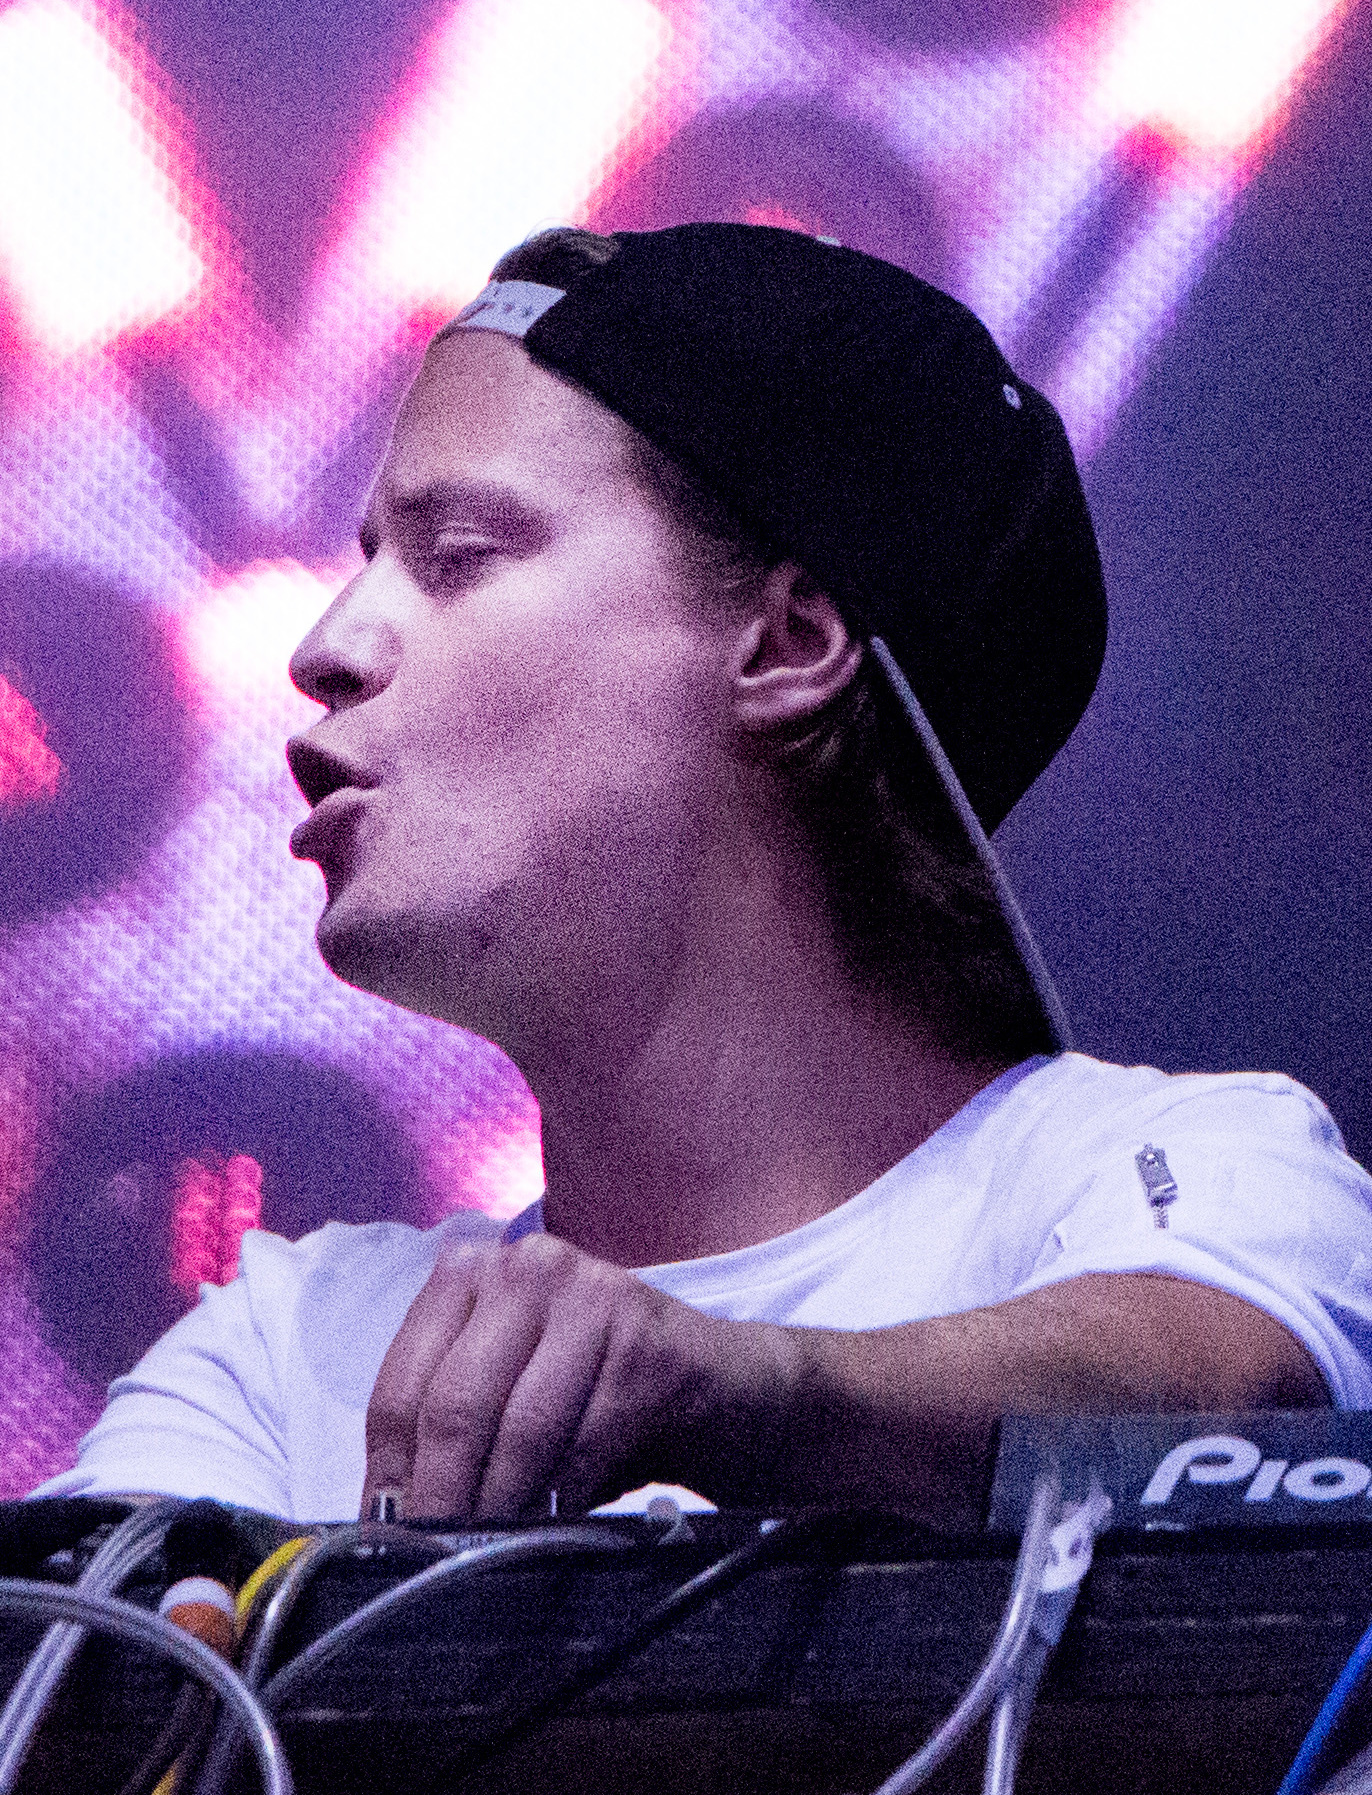 The 32-year old son of father (?) and mother(?) Kygo in 2023 photo. Kygo earned a  million dollar salary - leaving the net worth at 4 million in 2023